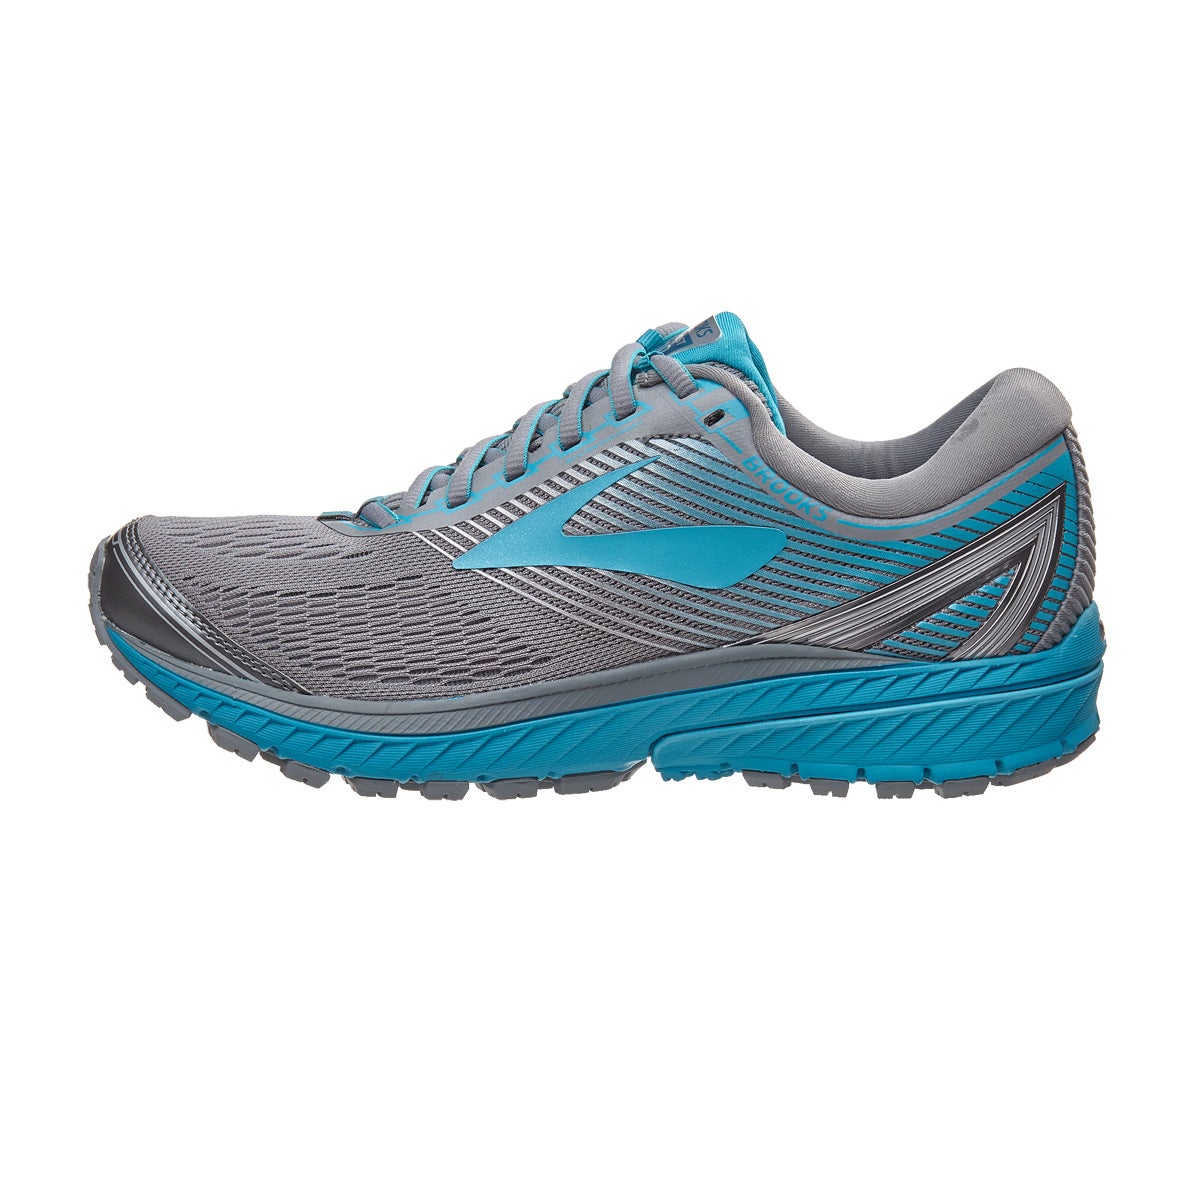 Brooks Ghost 10 Women's Shoes Primer Grey/Teal/Silve 360° View ...